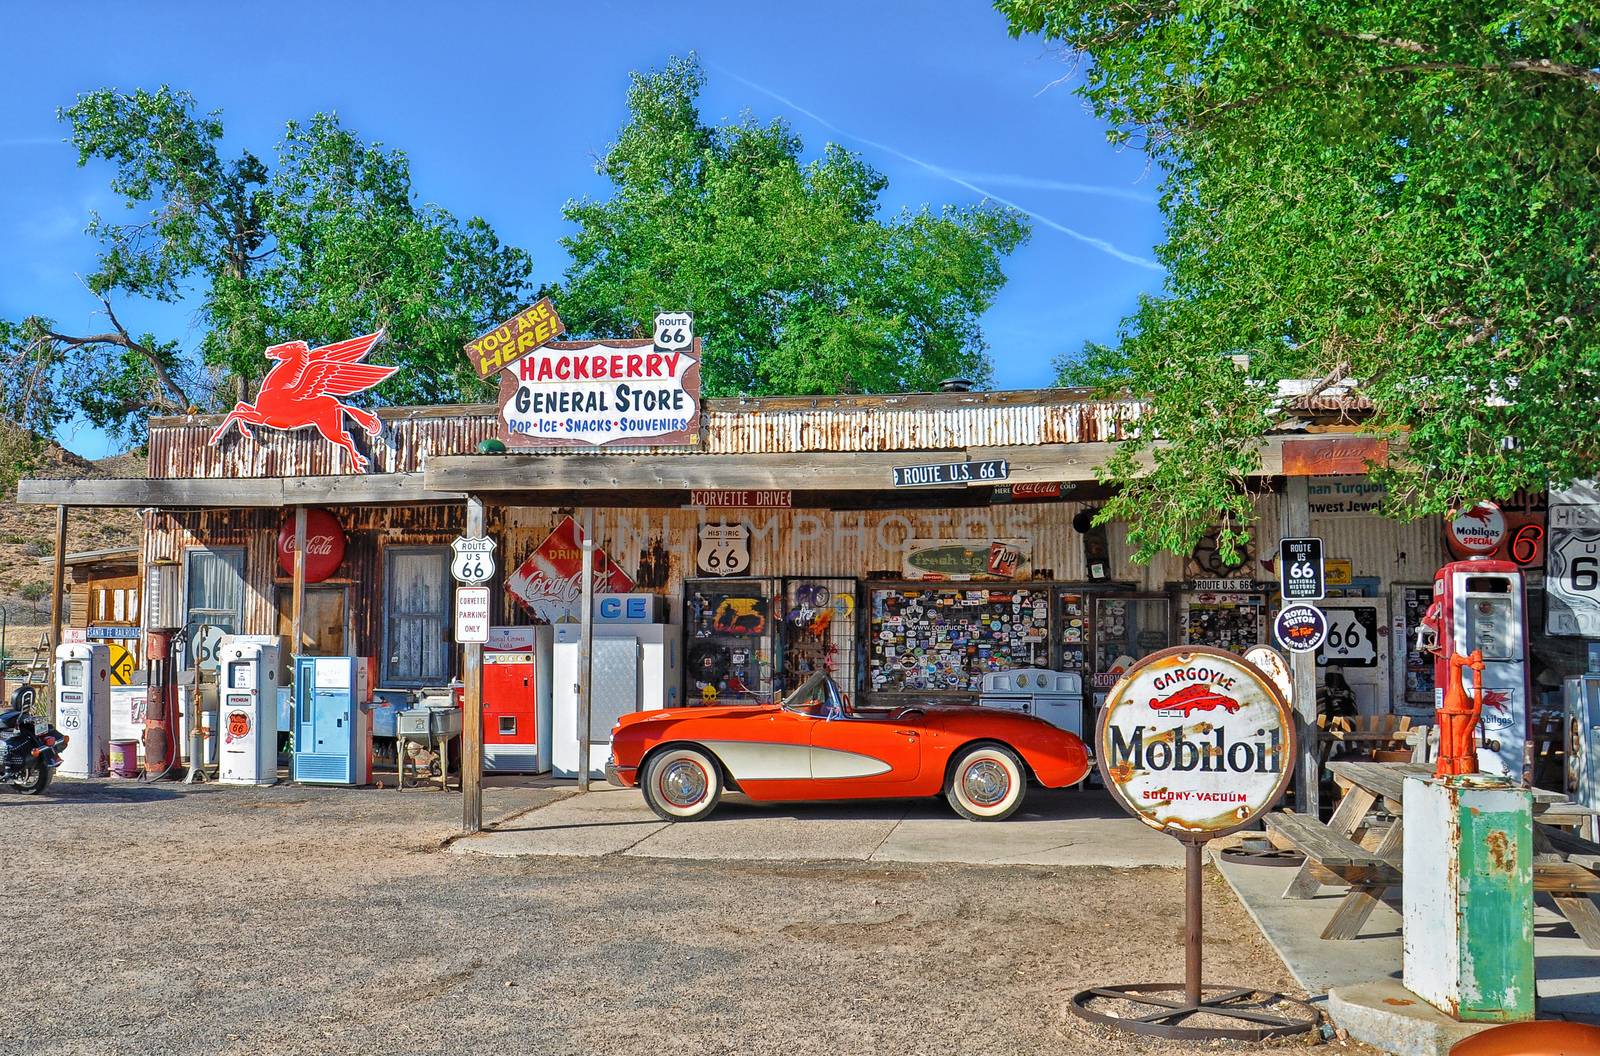 Corvette outside the Hackberry General Store on route 66 by nickfox